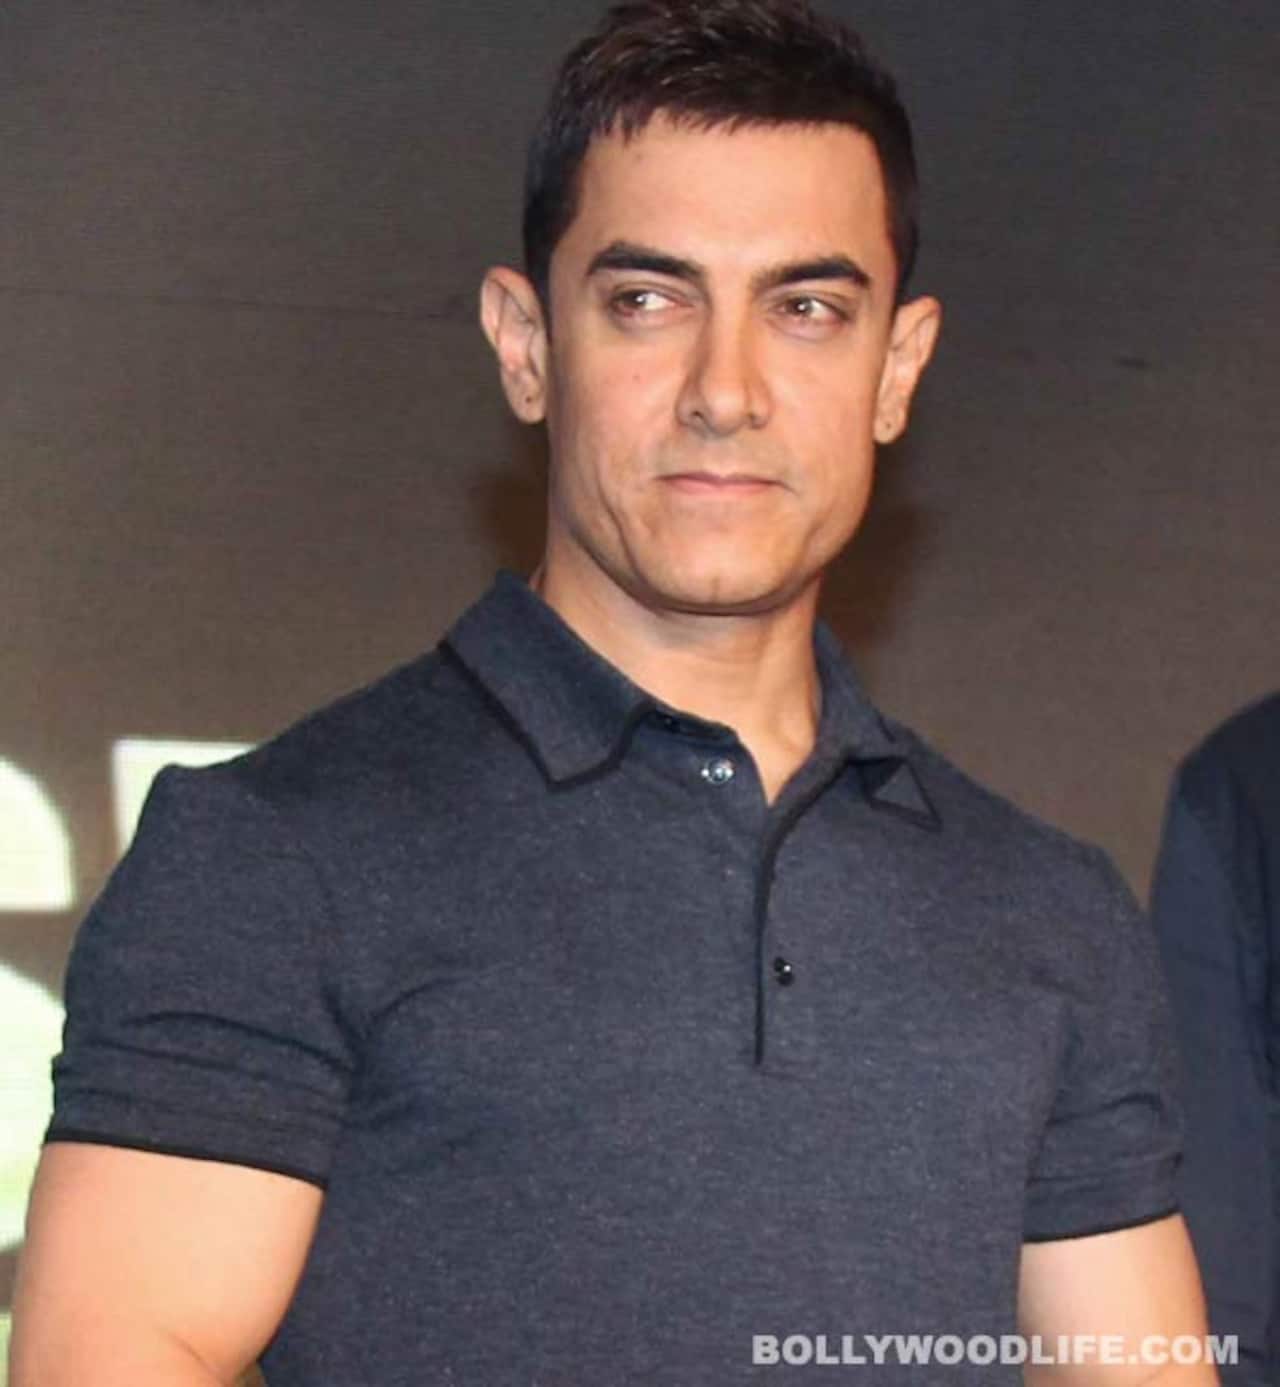 After P.K., Aamir Khan to play wrestler in Dungal